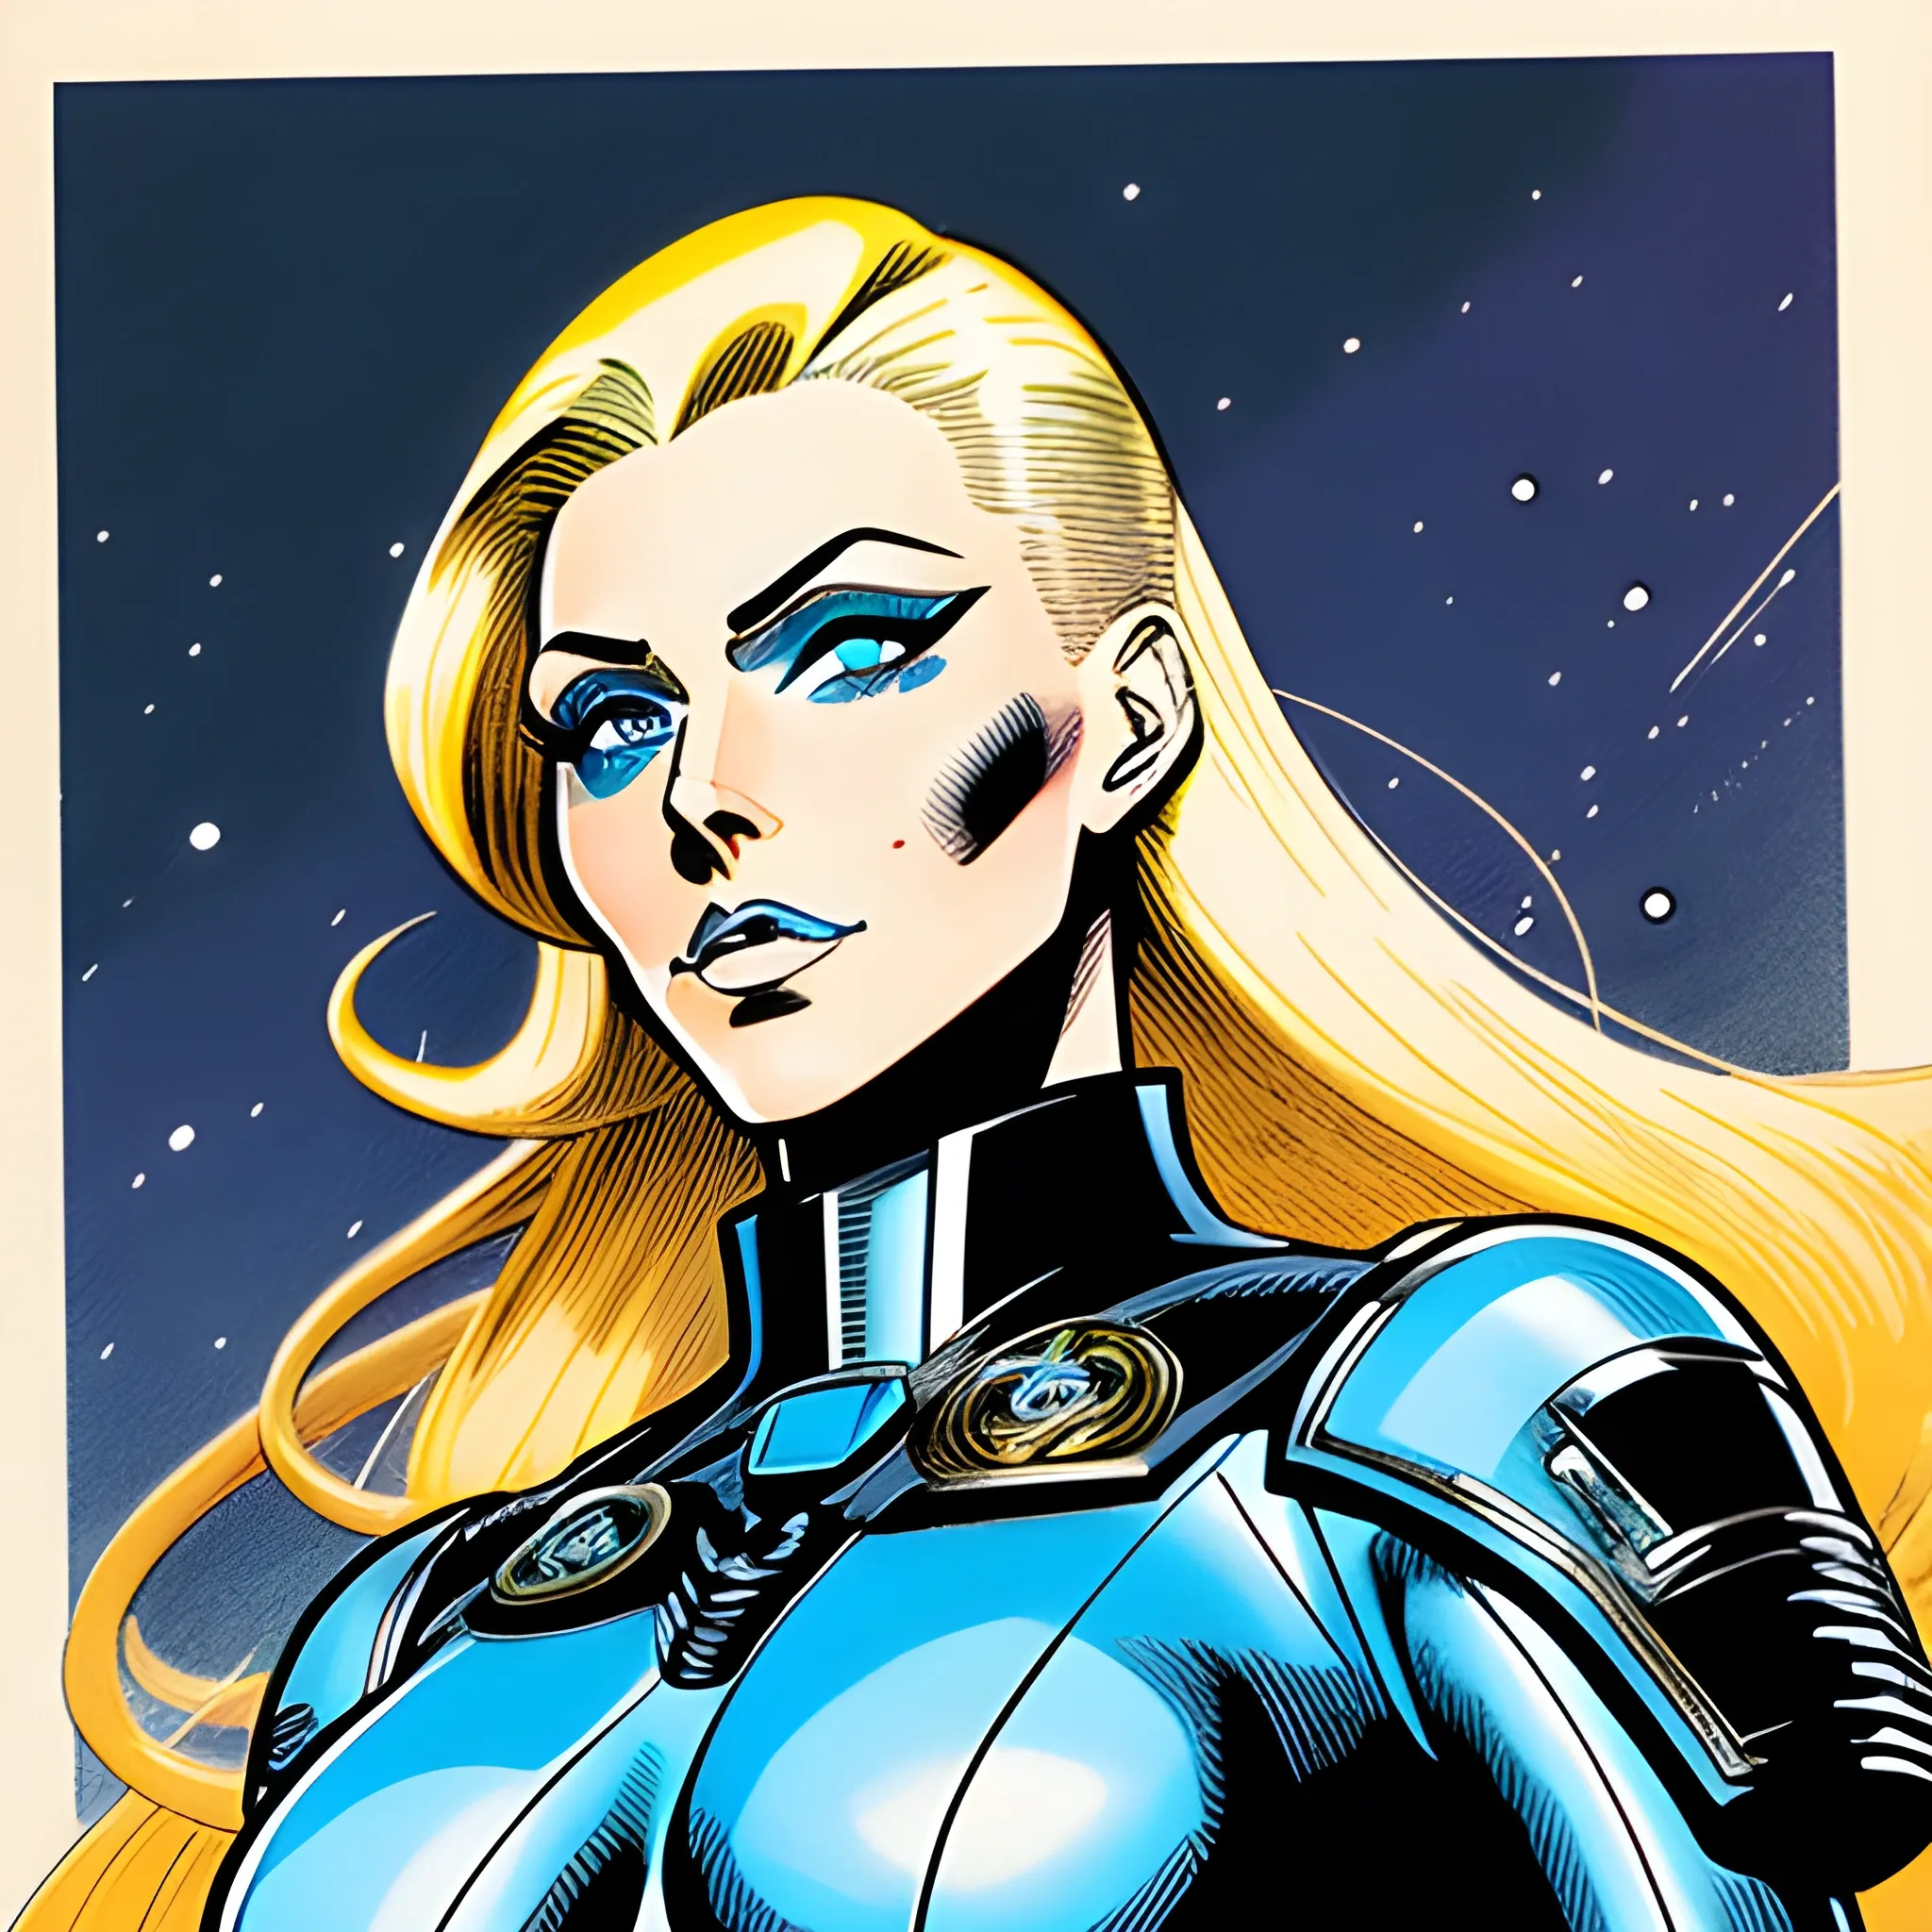 futuristic steampunk giant starship, macro art, anime girl blonde hair blue eyes wearing military nazi ss uniform, ripples, full body, illustration by al williamson, perfect face viewed in profile